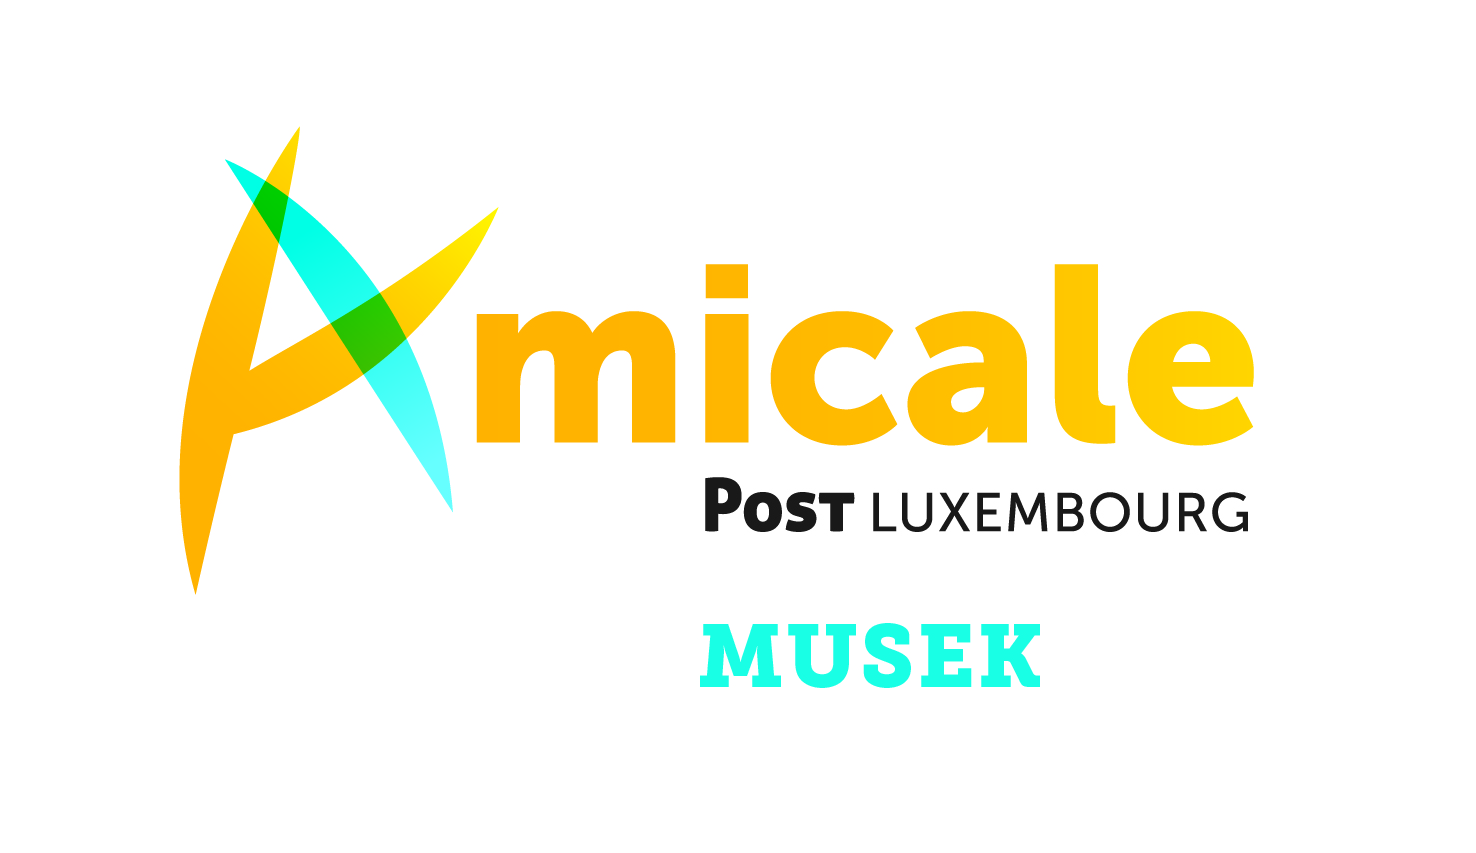 Amicale POST Luxembourg Musek